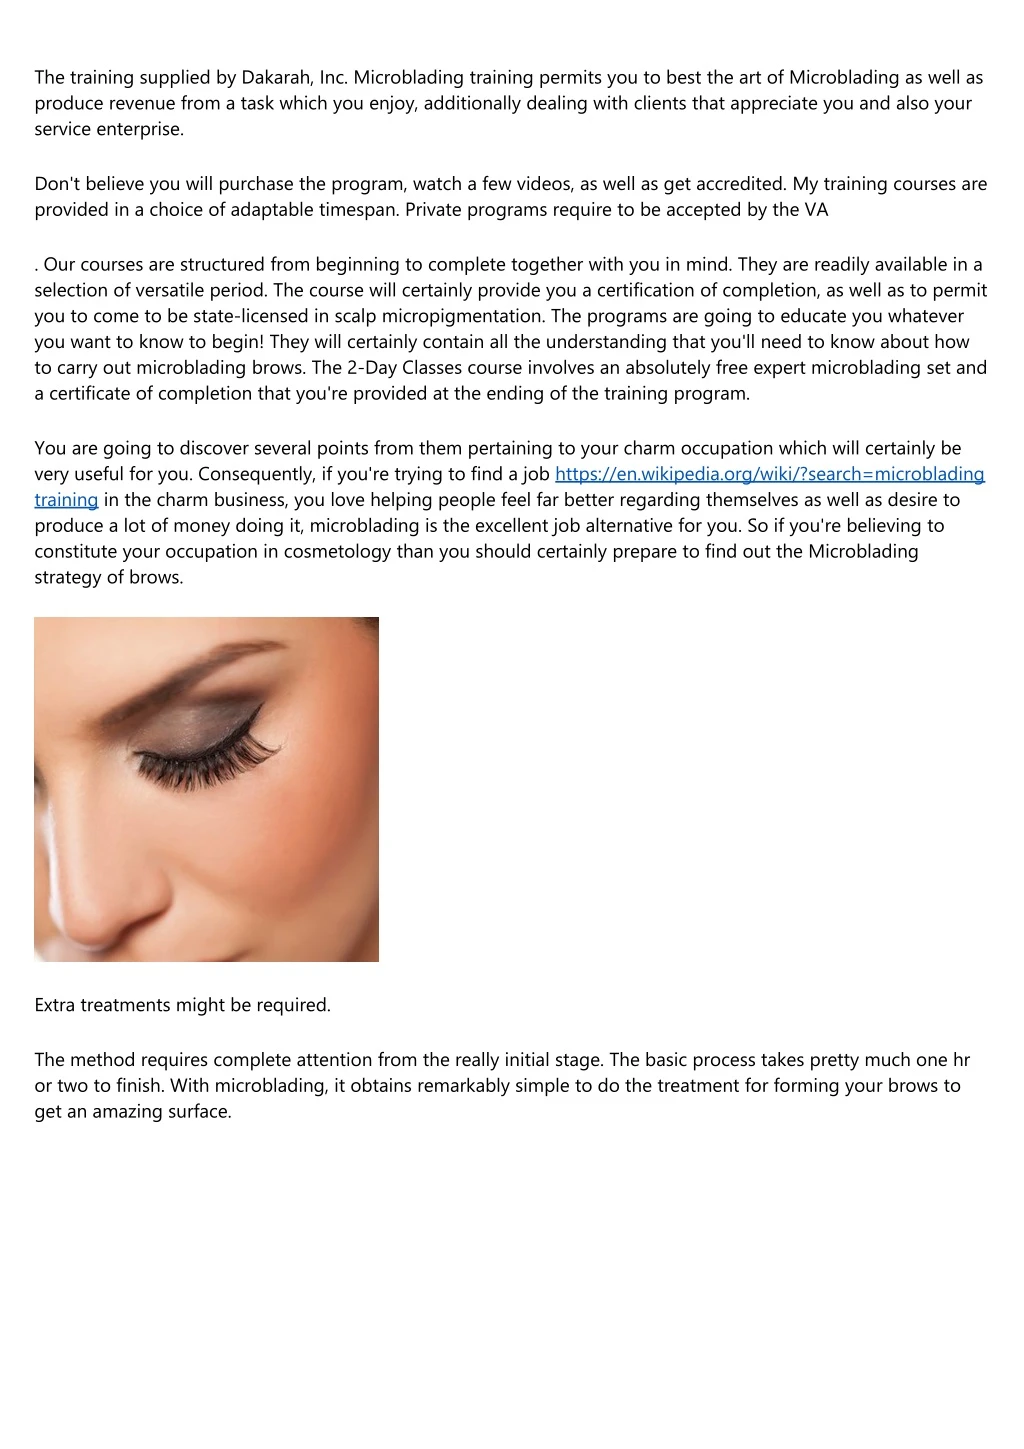 the training supplied by dakarah inc microblading